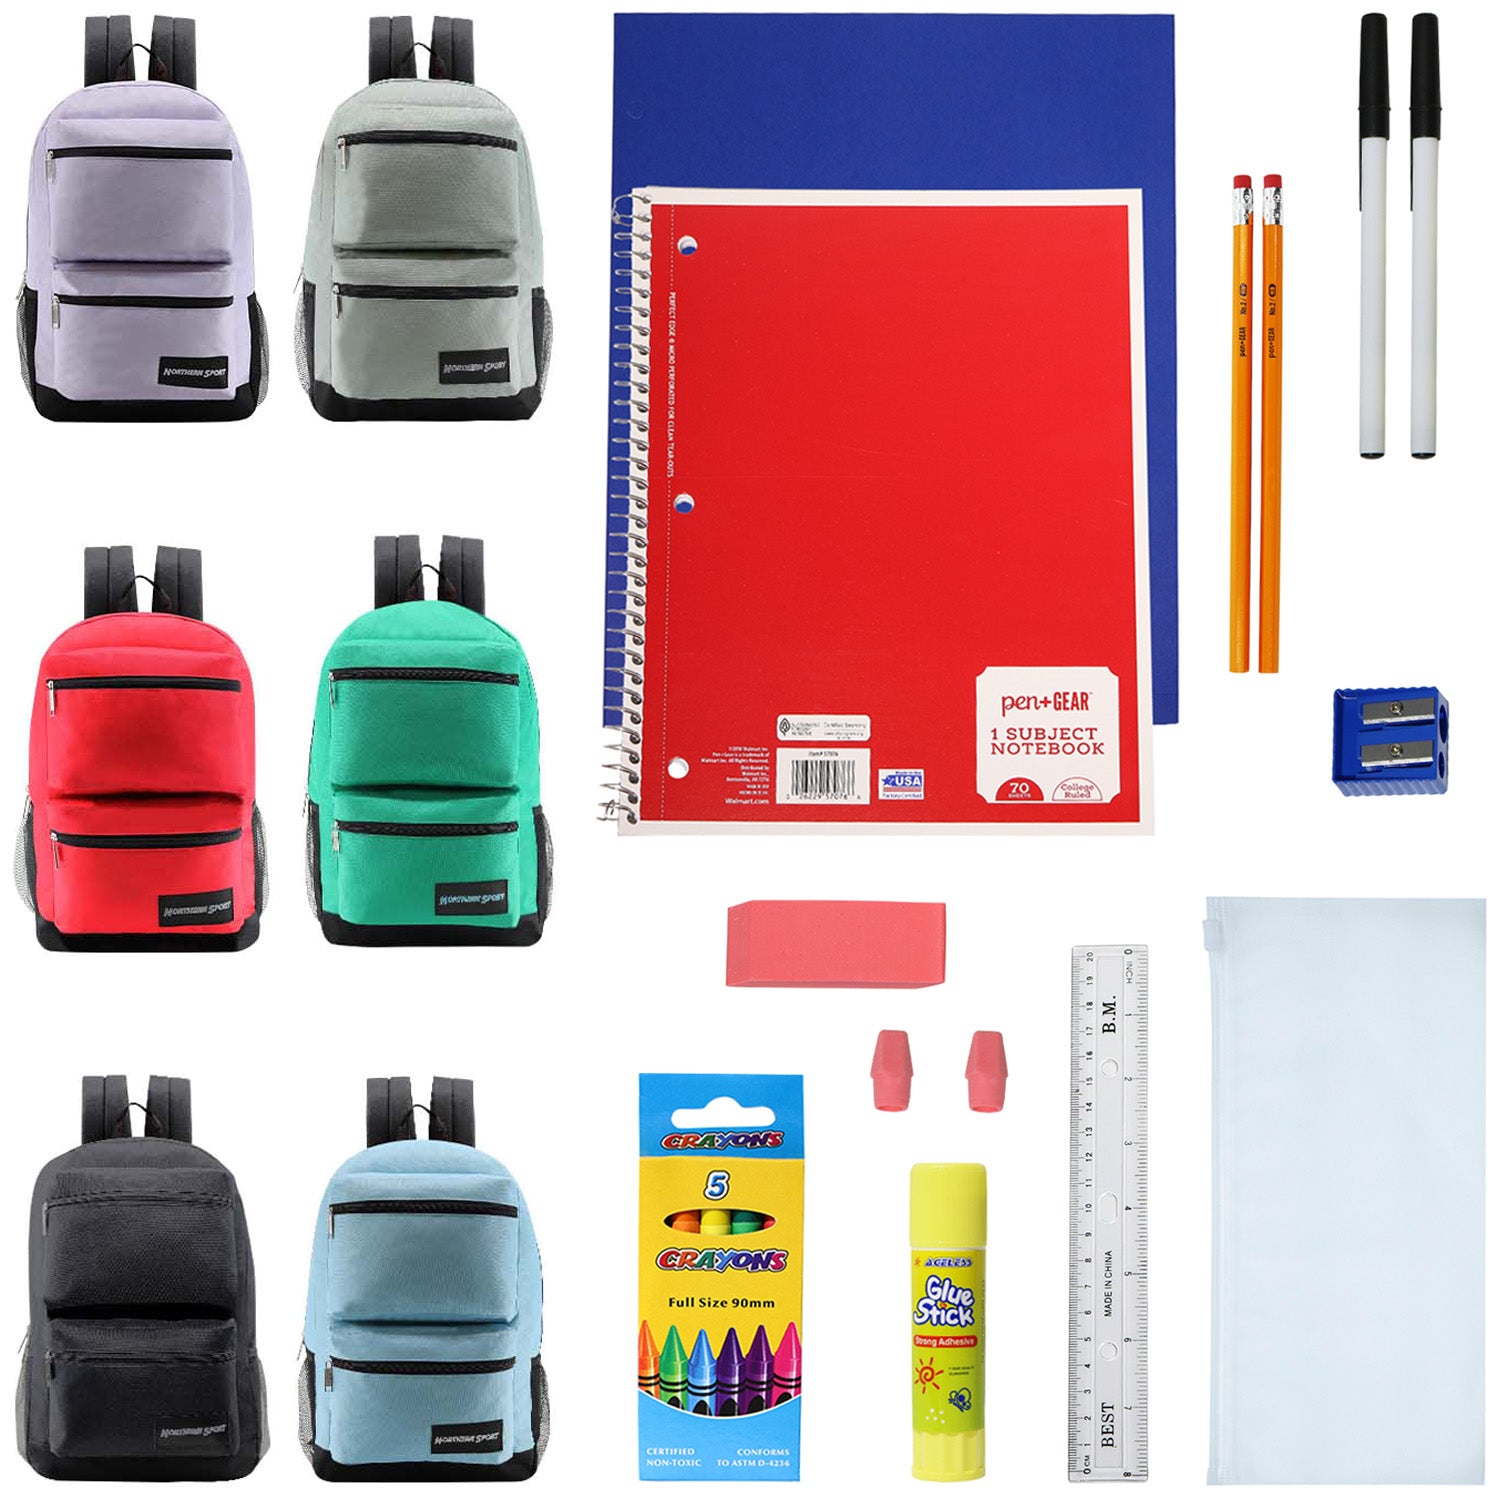 Basic School Supplies Kit - Discontinued